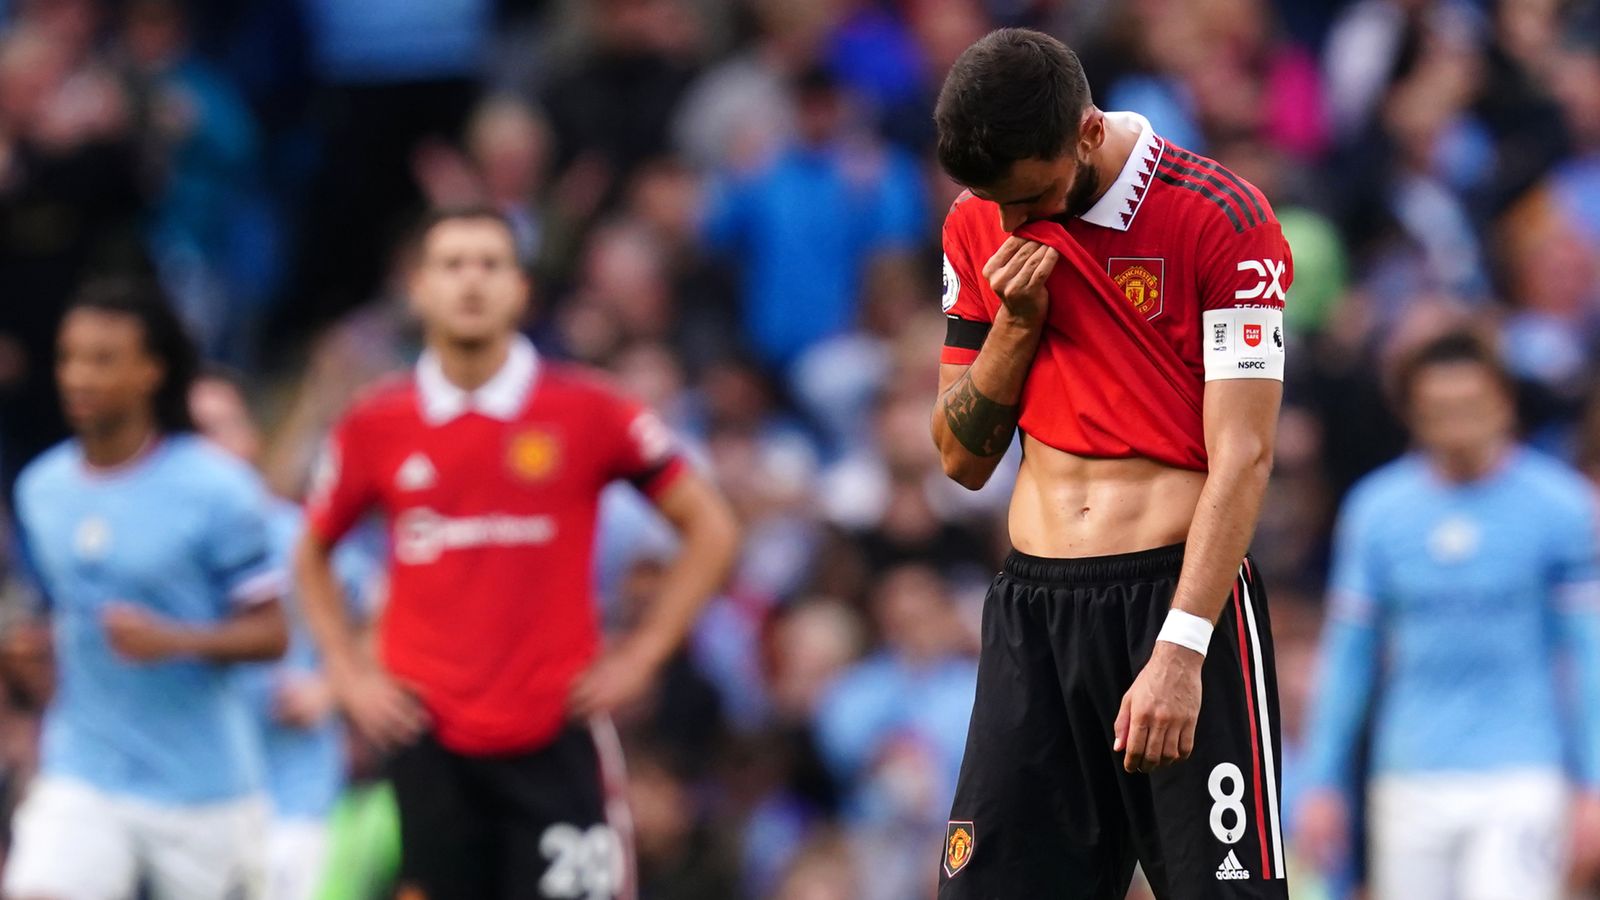 man-city-6-3-man-utd-roy-keane-says-manchester-united-players-should-be-embarrassed-after-trailing-4-0-in-derby